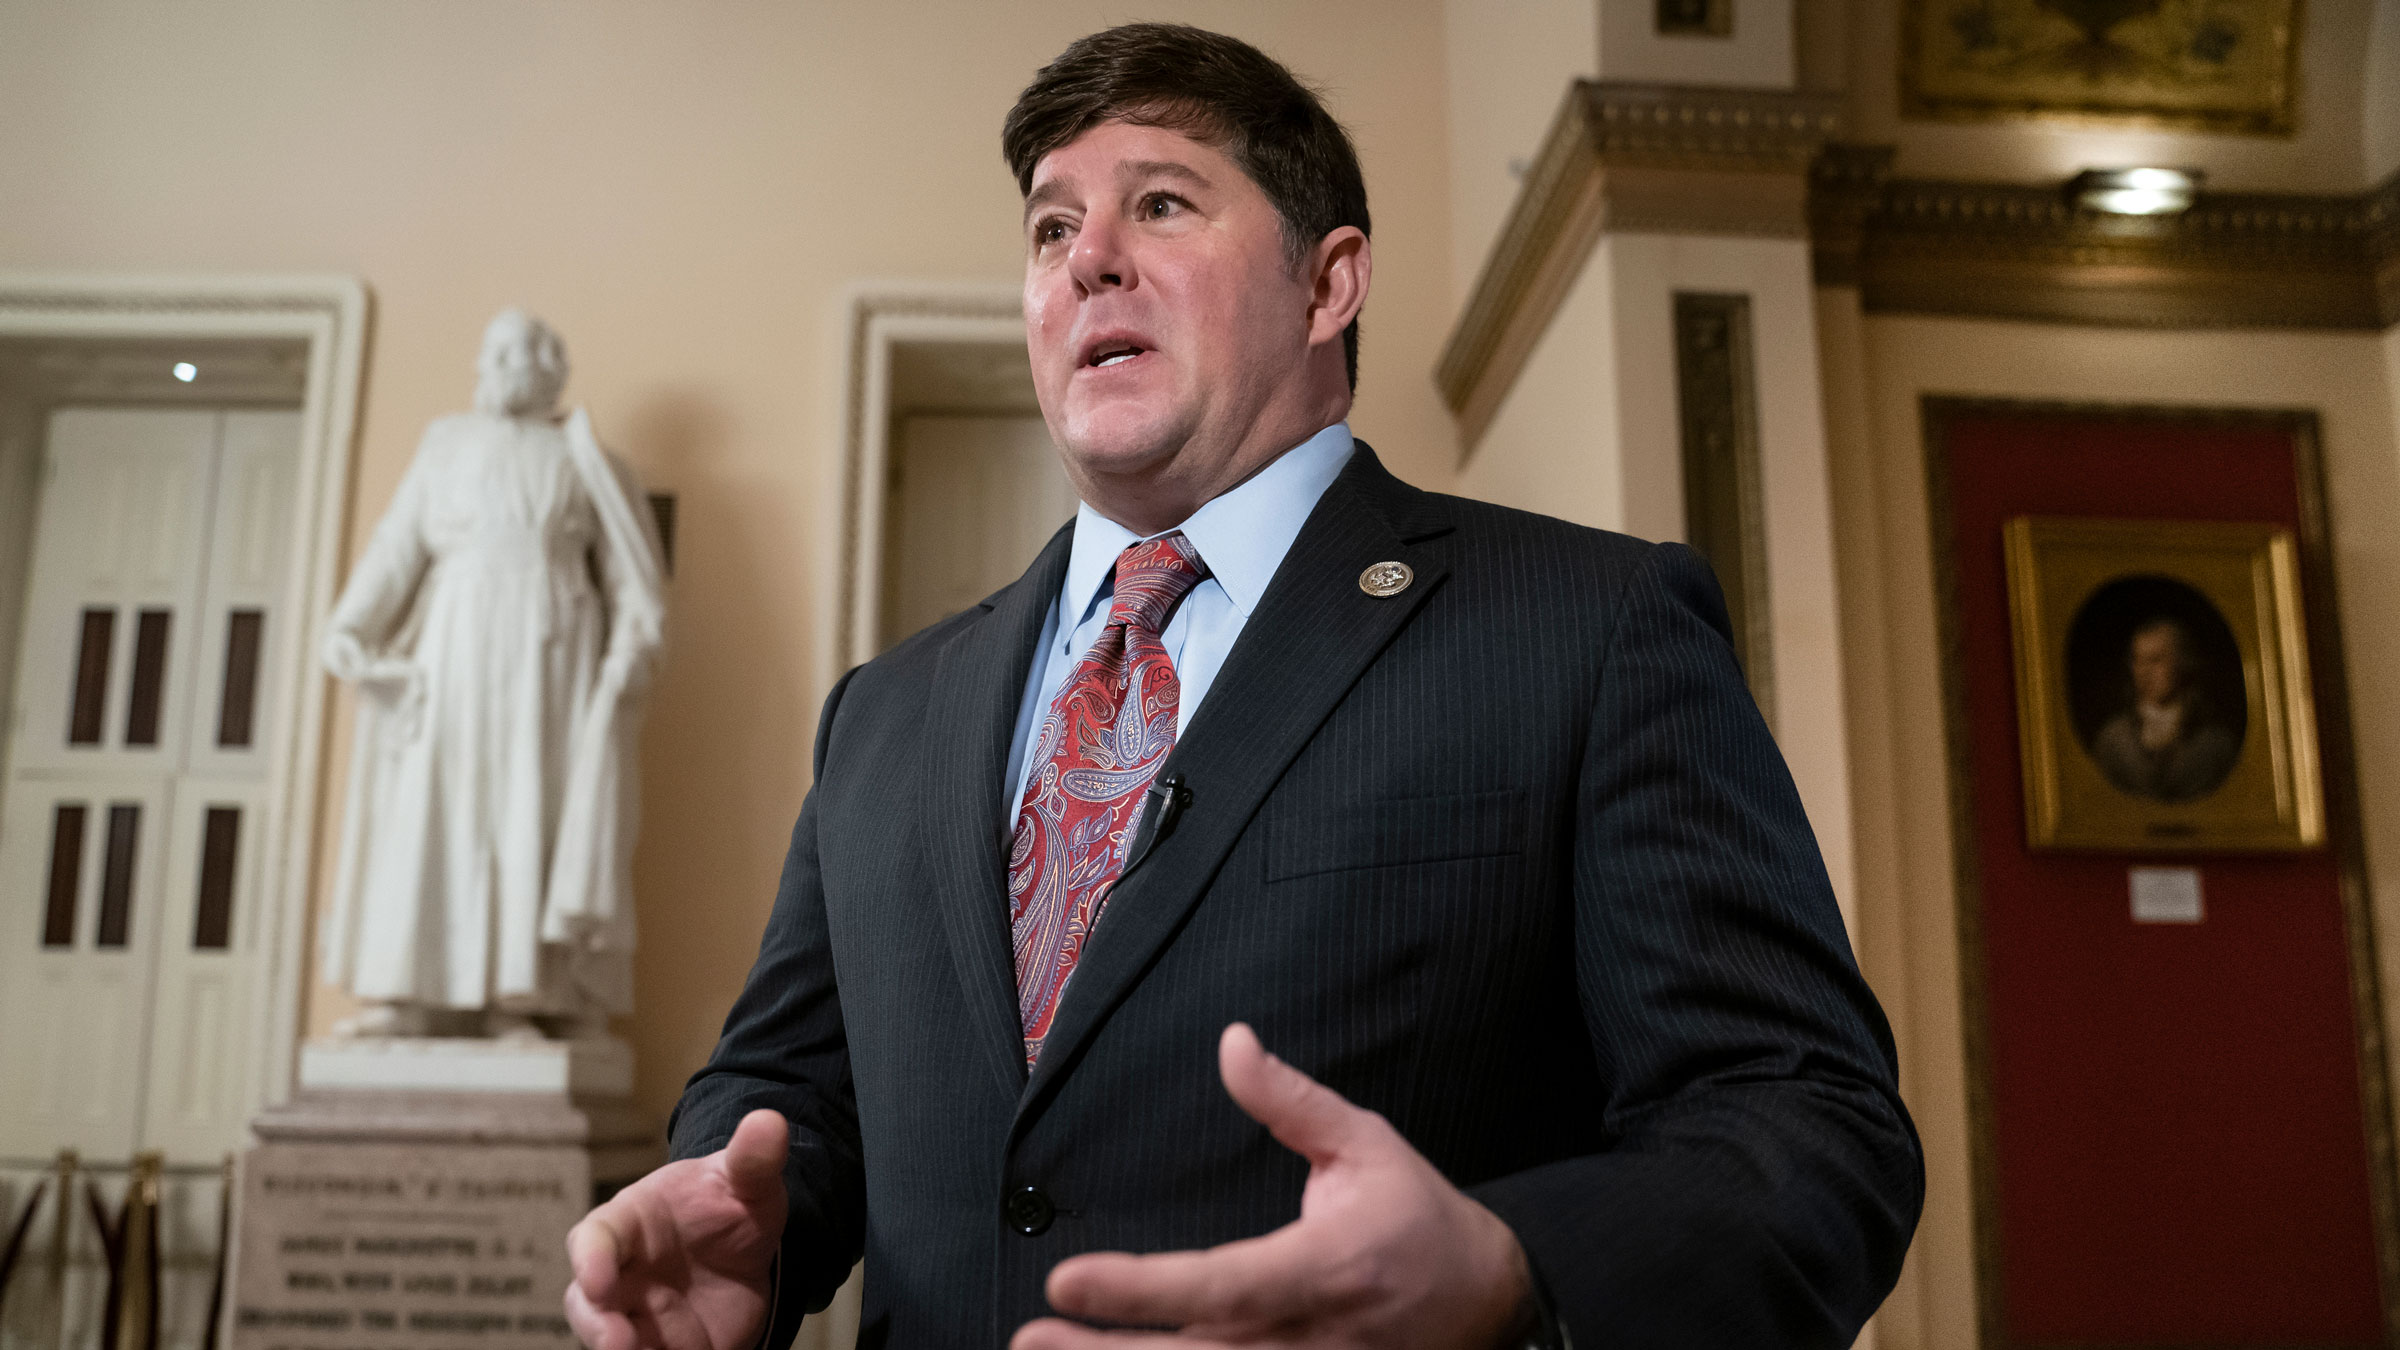 US Rep. Steven Palazzo gives a television interview in Washington in 2019.